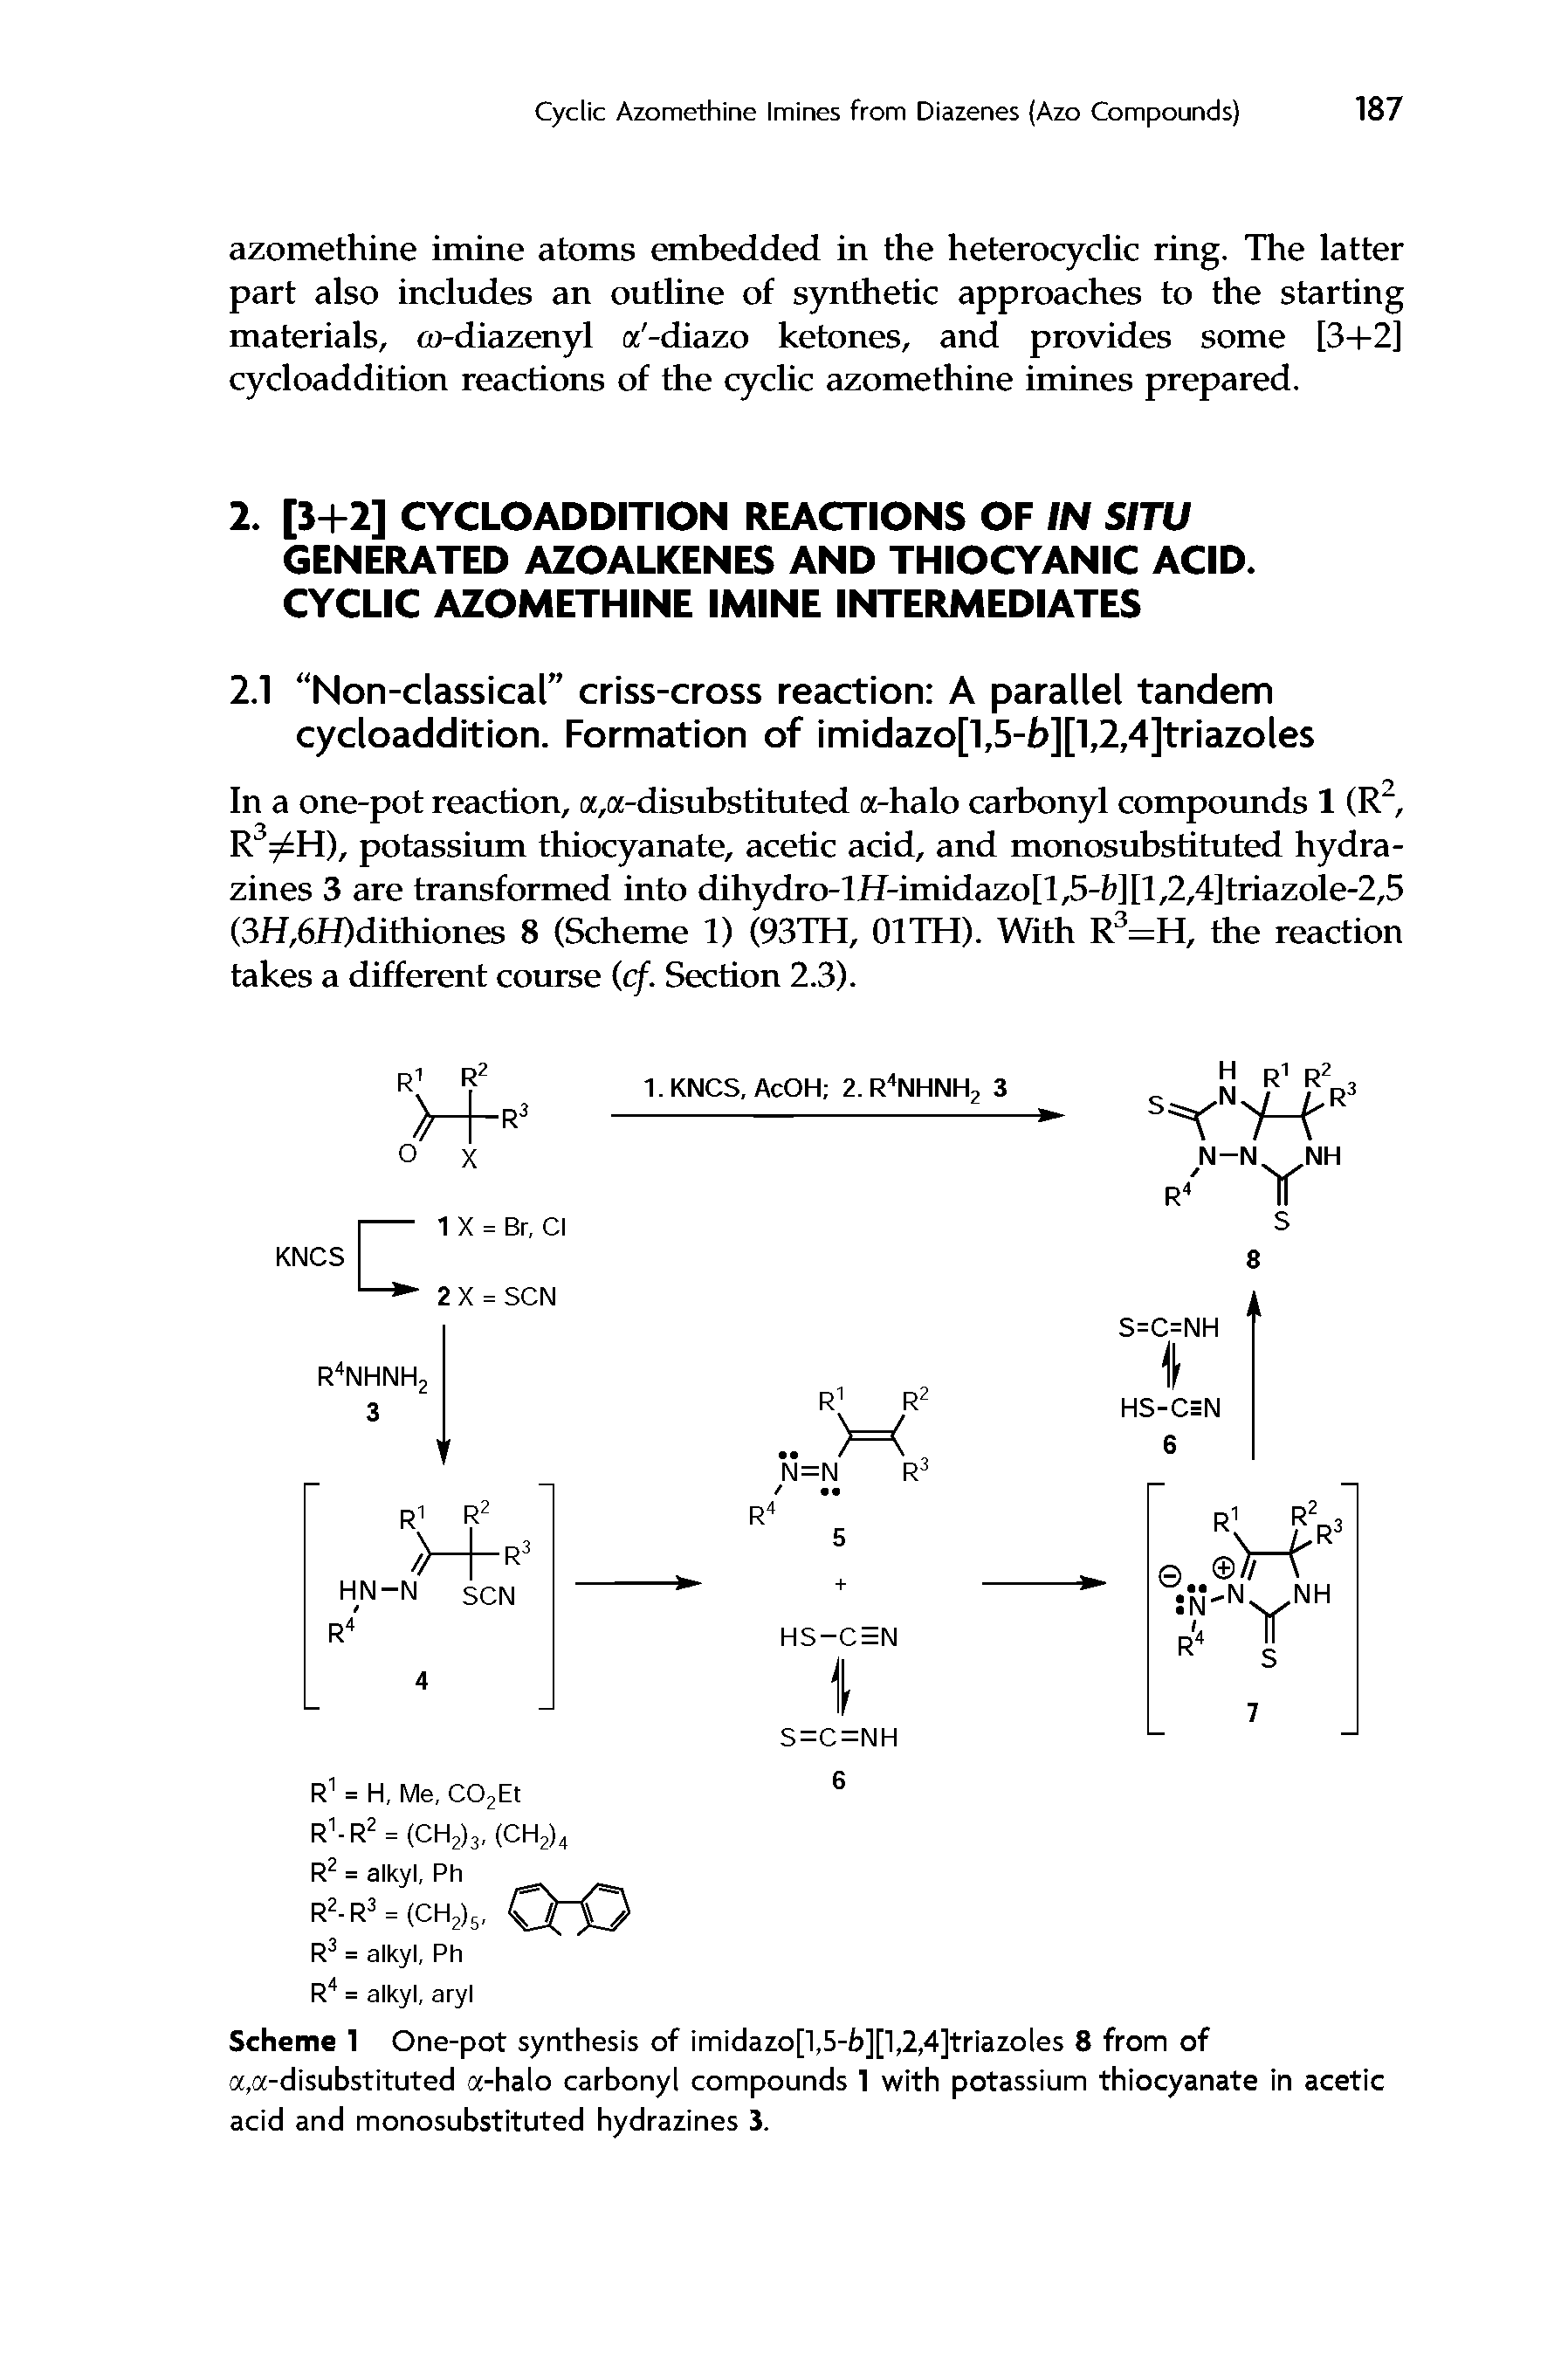 Scheme 1 One-pot synthesis of lmldazo[l,5-b][l,2,4]triazoles 8 from of a,a-dlsubstltuted a-halo carbonyl compounds 1 with potassium thiocyanate in acetic acid and monosubstituted hydrazines 3.